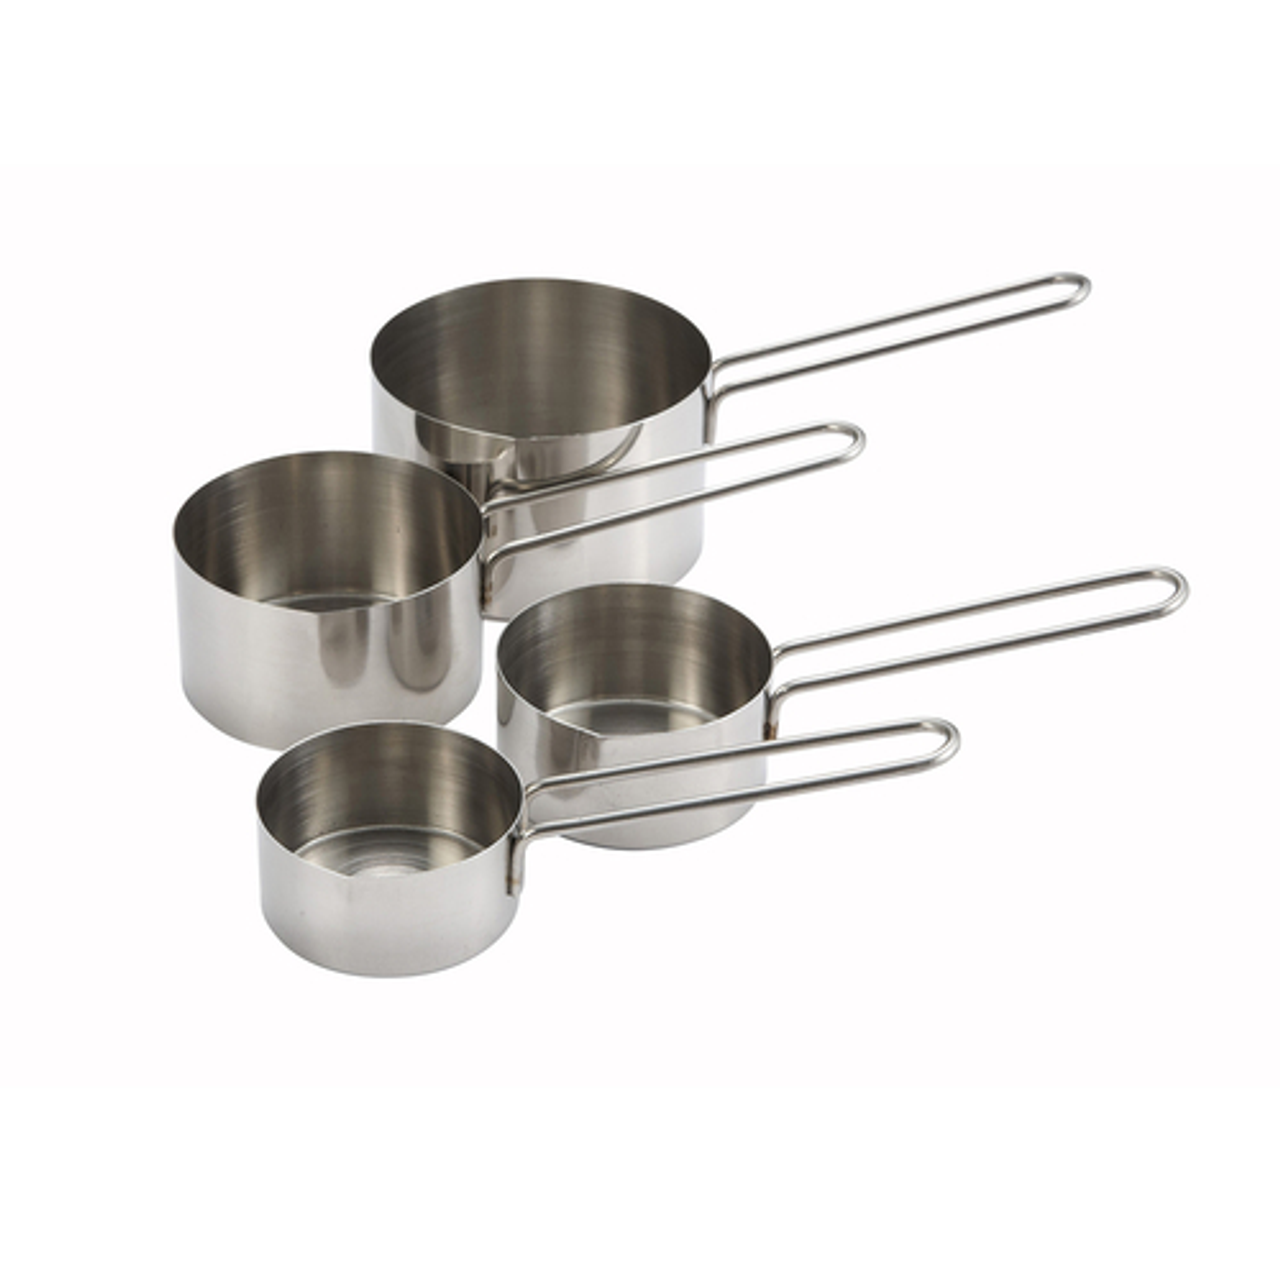 Measuring Cup Set, 4-piece set includes: 1/4, 1/3, 1/2 & 1 cup, stainless steel